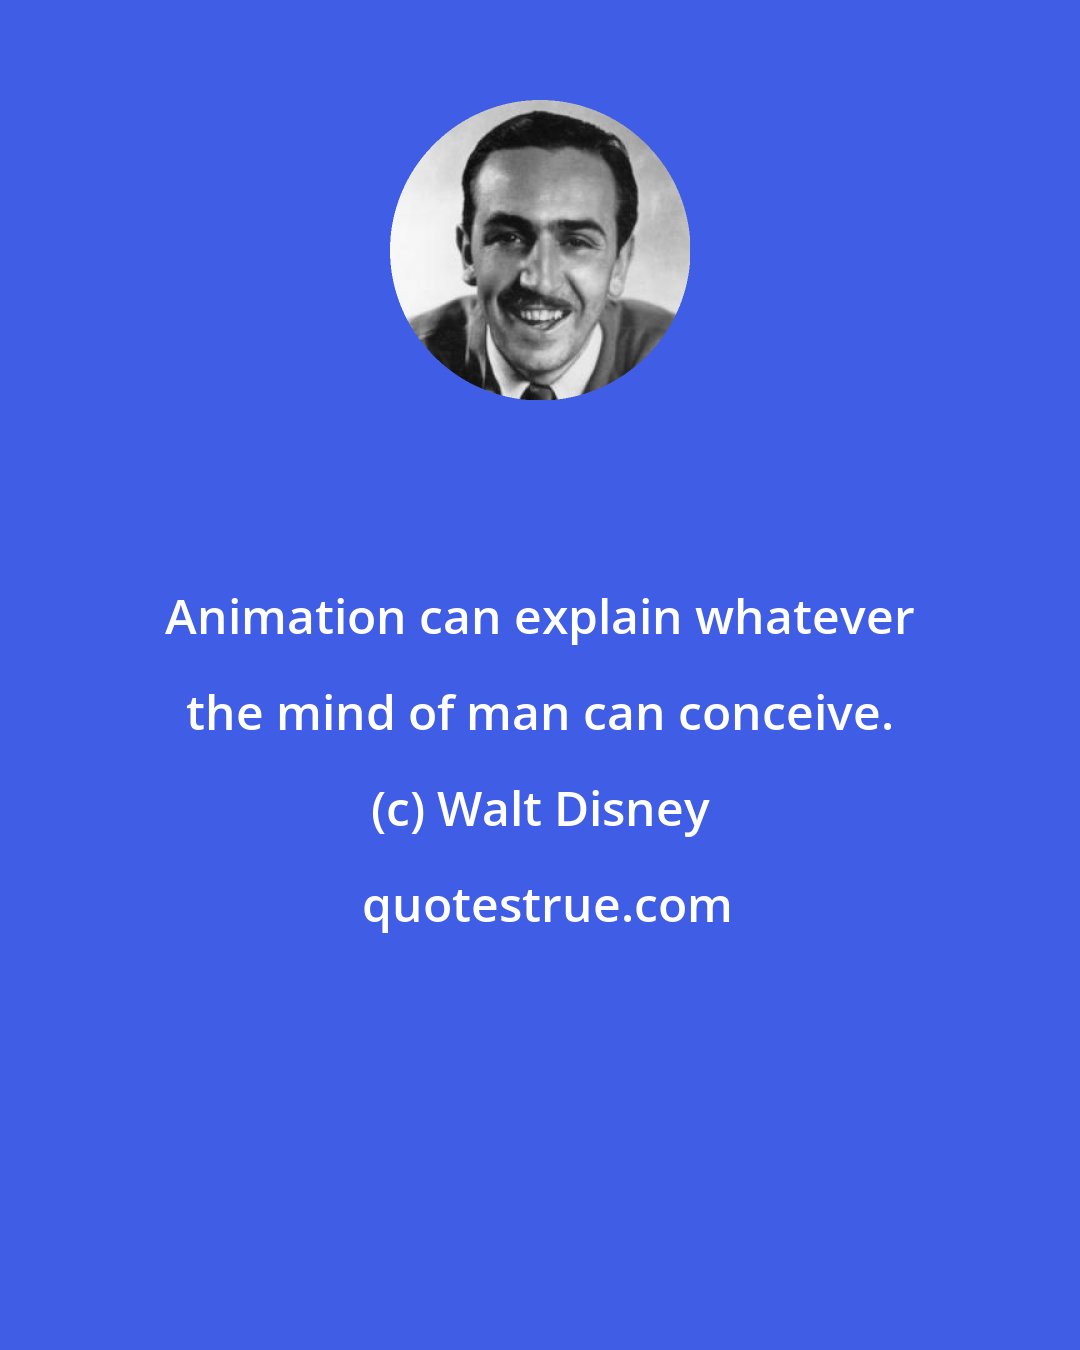 Walt Disney: Animation can explain whatever the mind of man can conceive.